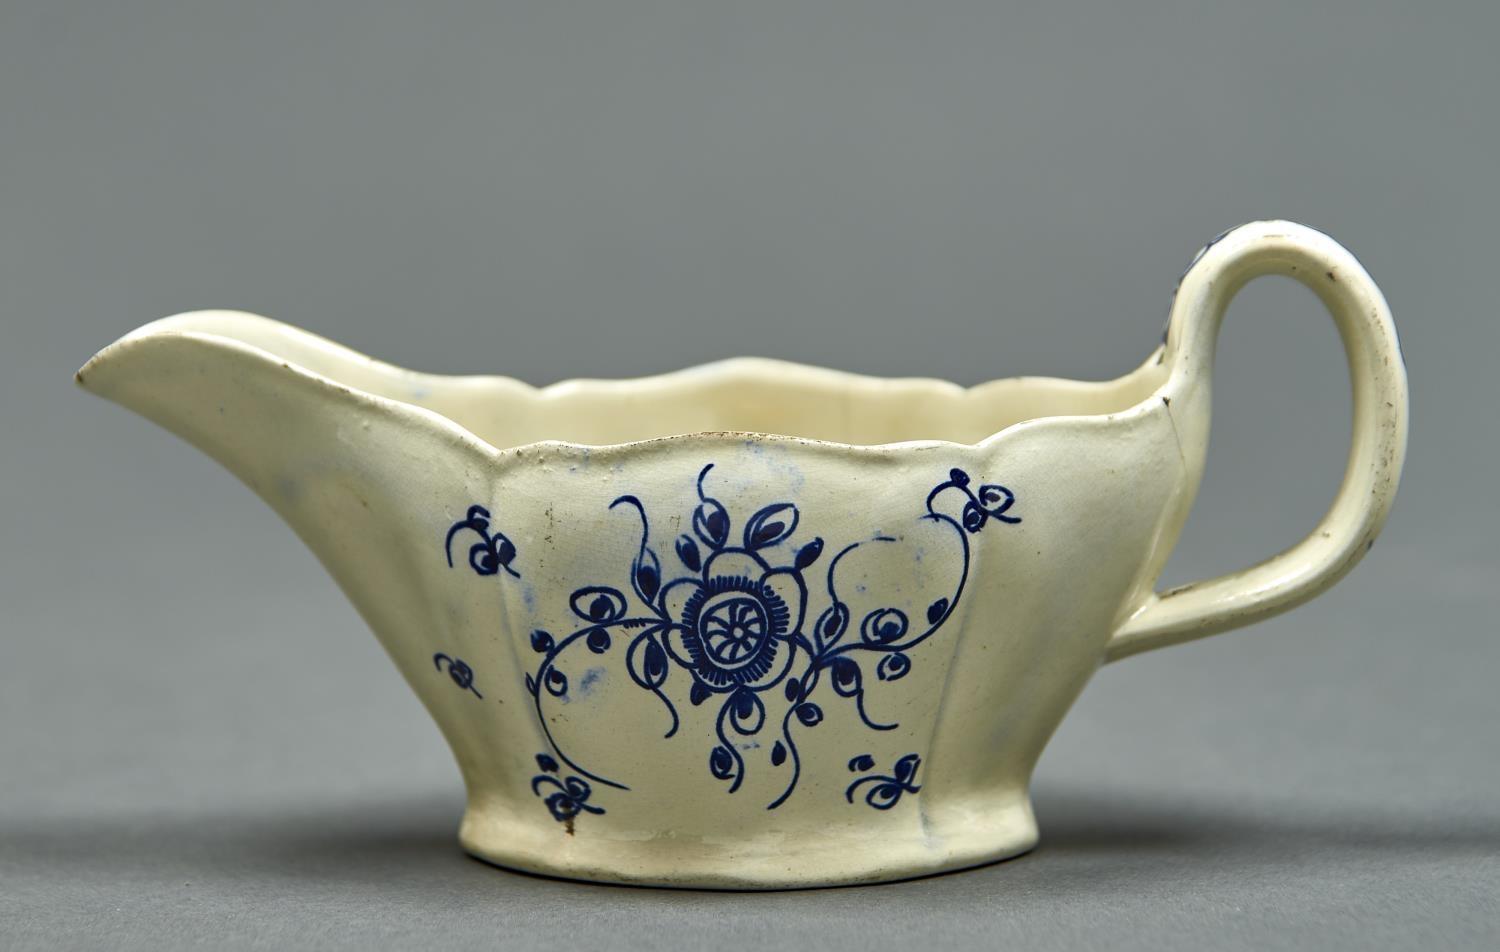 A CREAMWARE SAUCEBOAT, PERHAPS YORKSHIRE, C1790, PAINTED IN BLUE TO EITHER SIDE WITH A SIMPLE